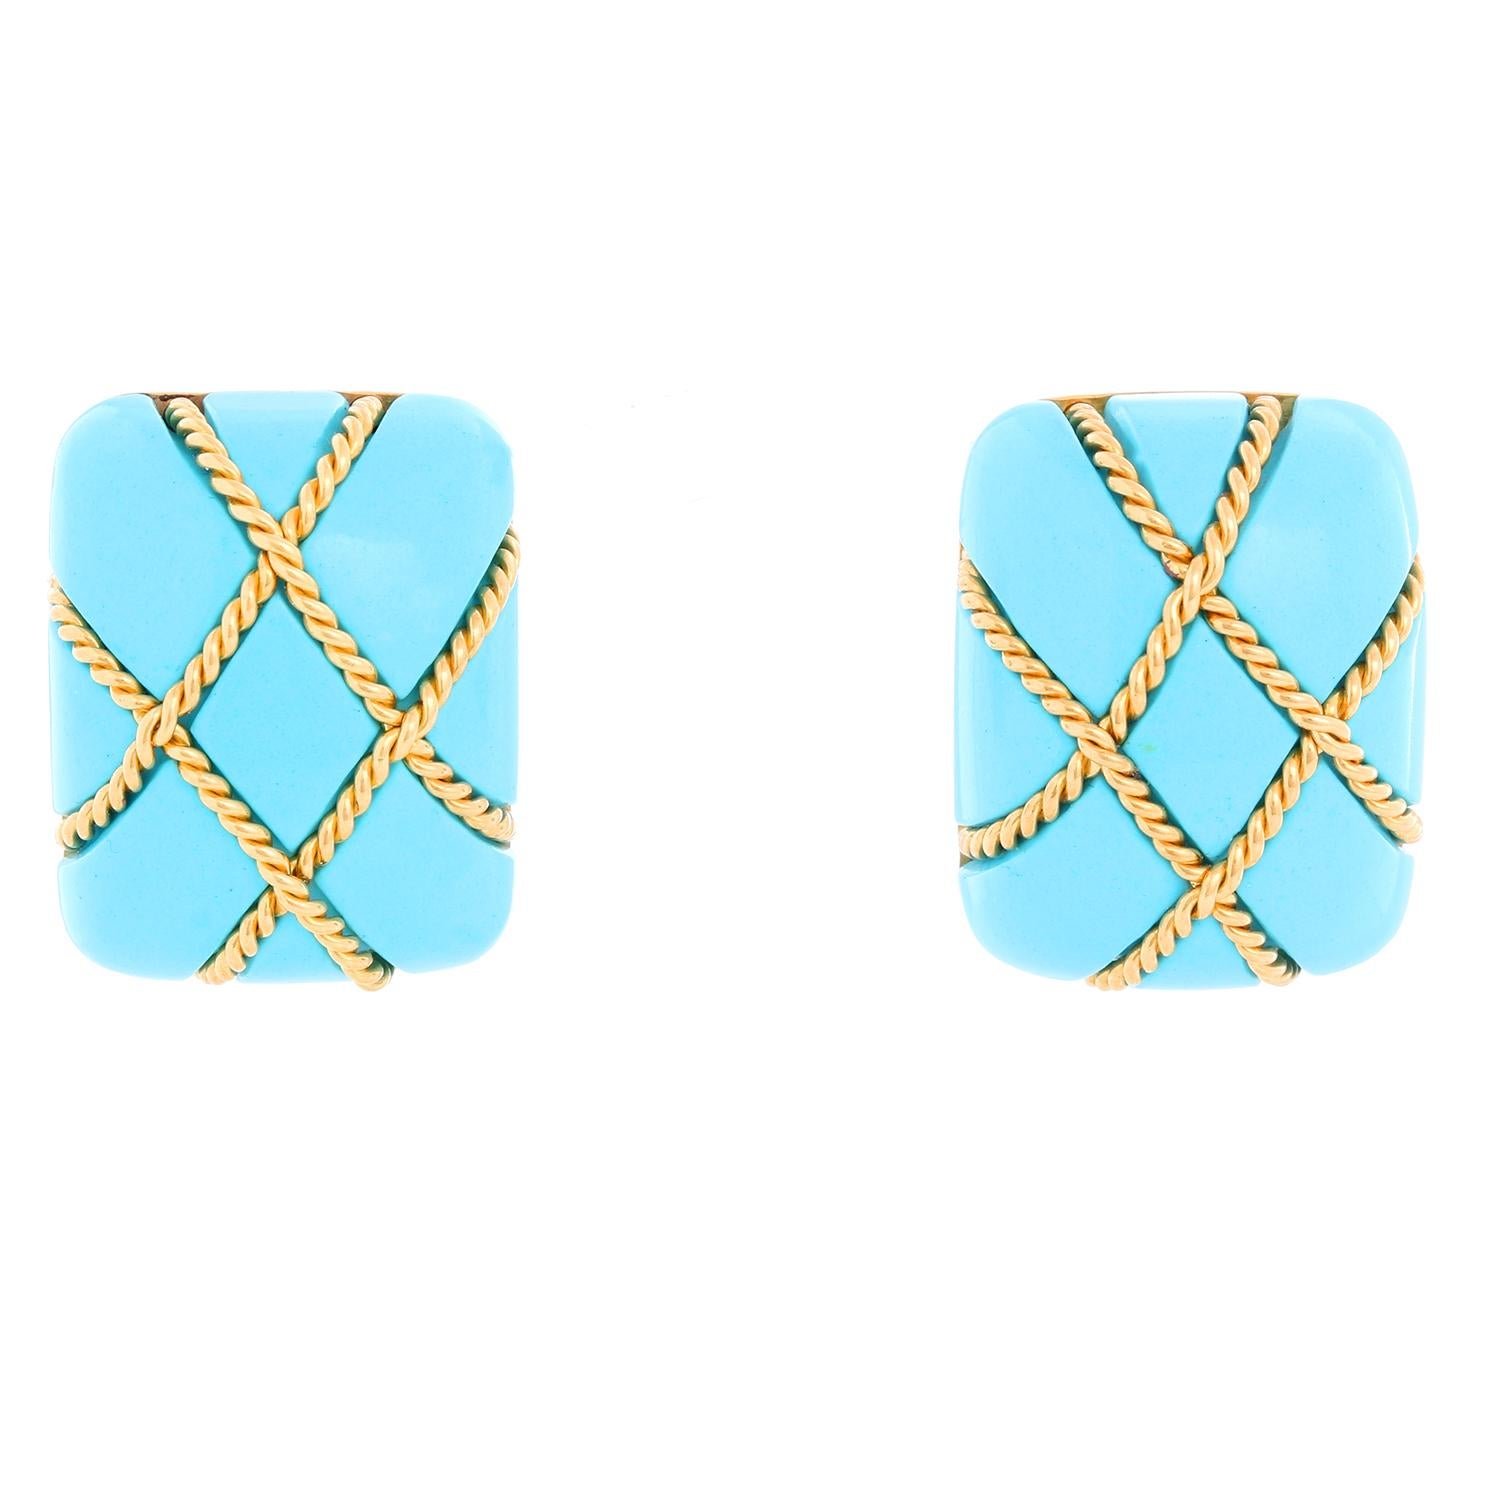 Seaman Schepps 18K Large Square Cage Turquoise Earrings - Vntage Seaman Schepps Turquoise earrings  crafted in 18k yellow gold. Weight: 33.3 grams The earrings measure 26mm in length (1.02 inches) and 20mm wide (0.78 inches). The earrings are fitted